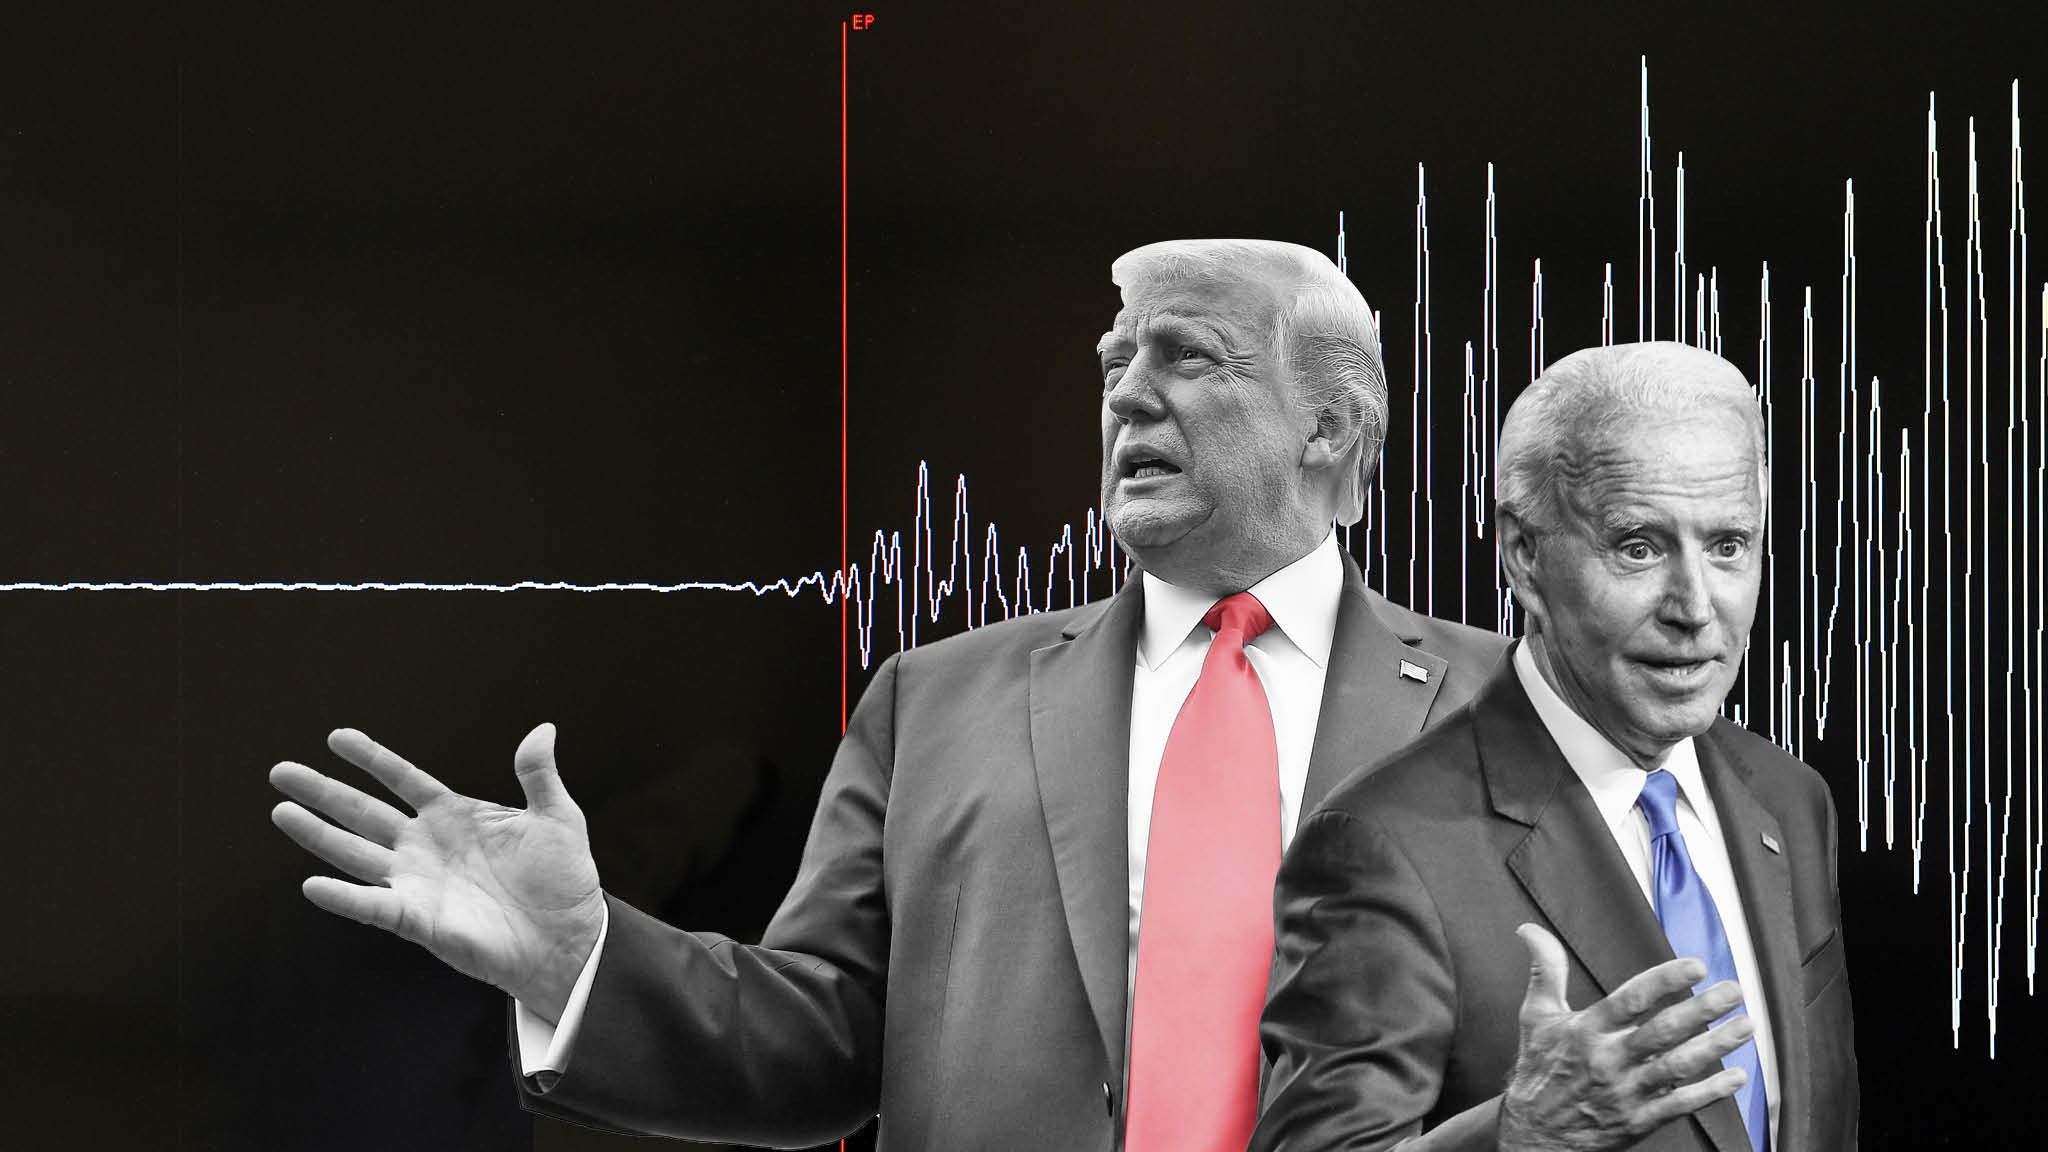 Donald Trump vs Joe Biden: markets rattled by risk of a messy election result